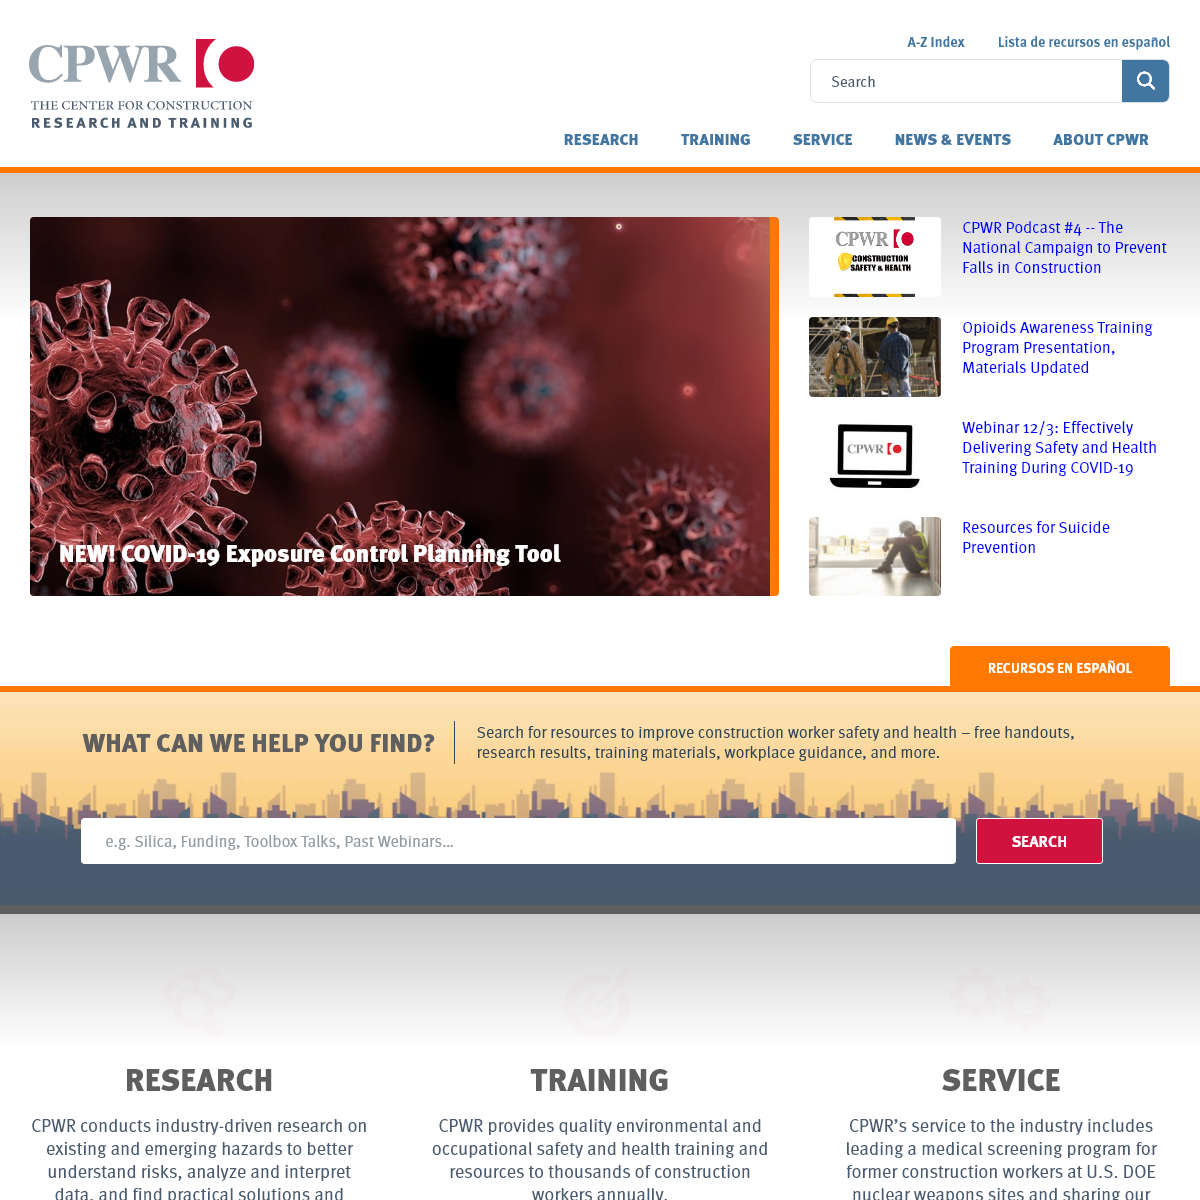 A complete backup of cpwr.com